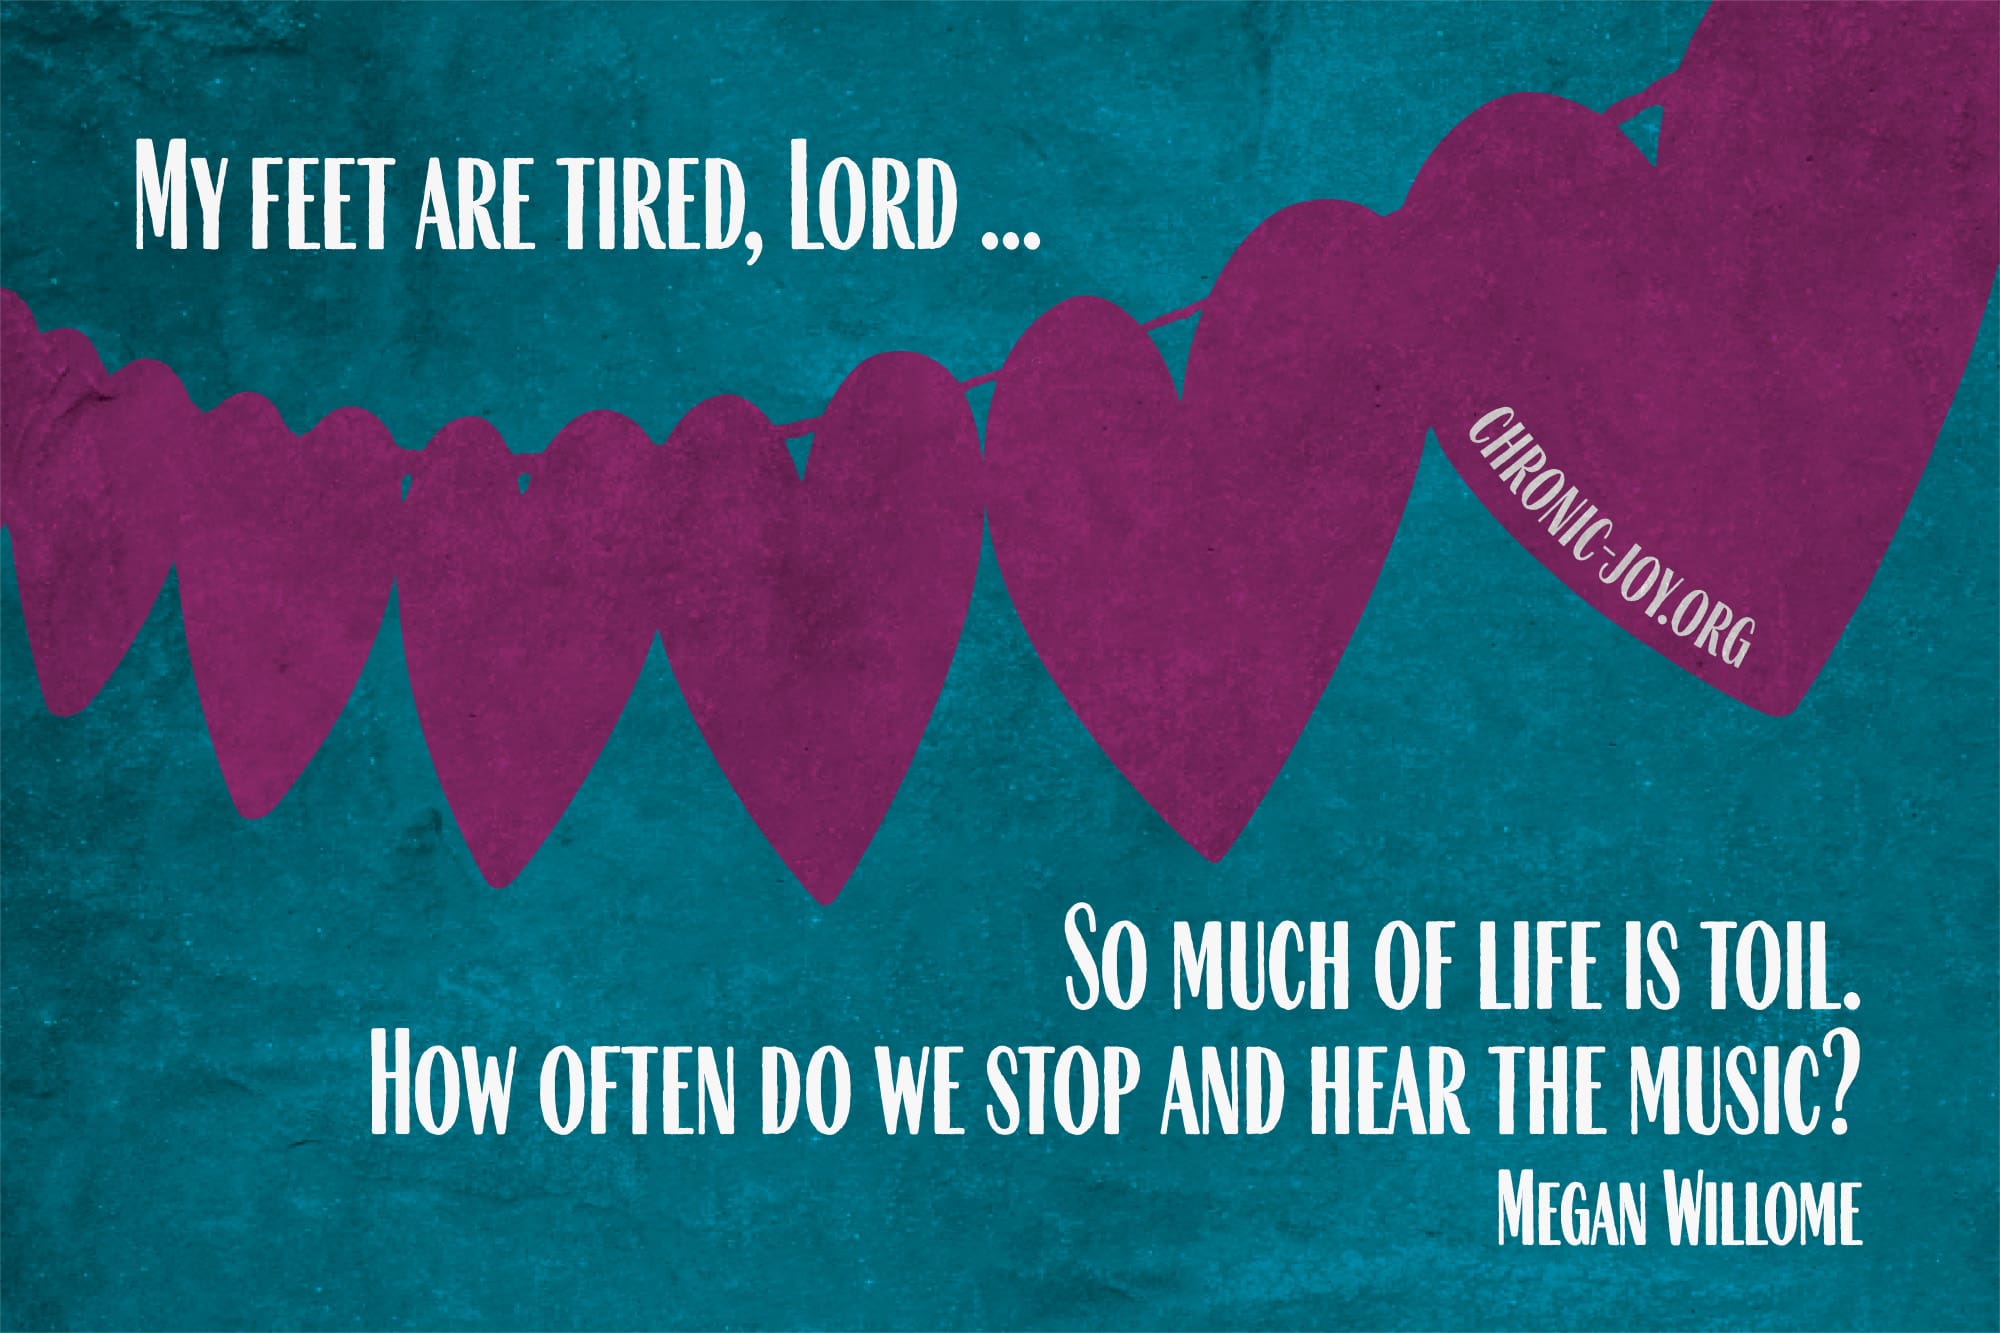 "My feet are tired, Lord ... So much of life is toil. How often do we stop and hear the music?" Megan Willome